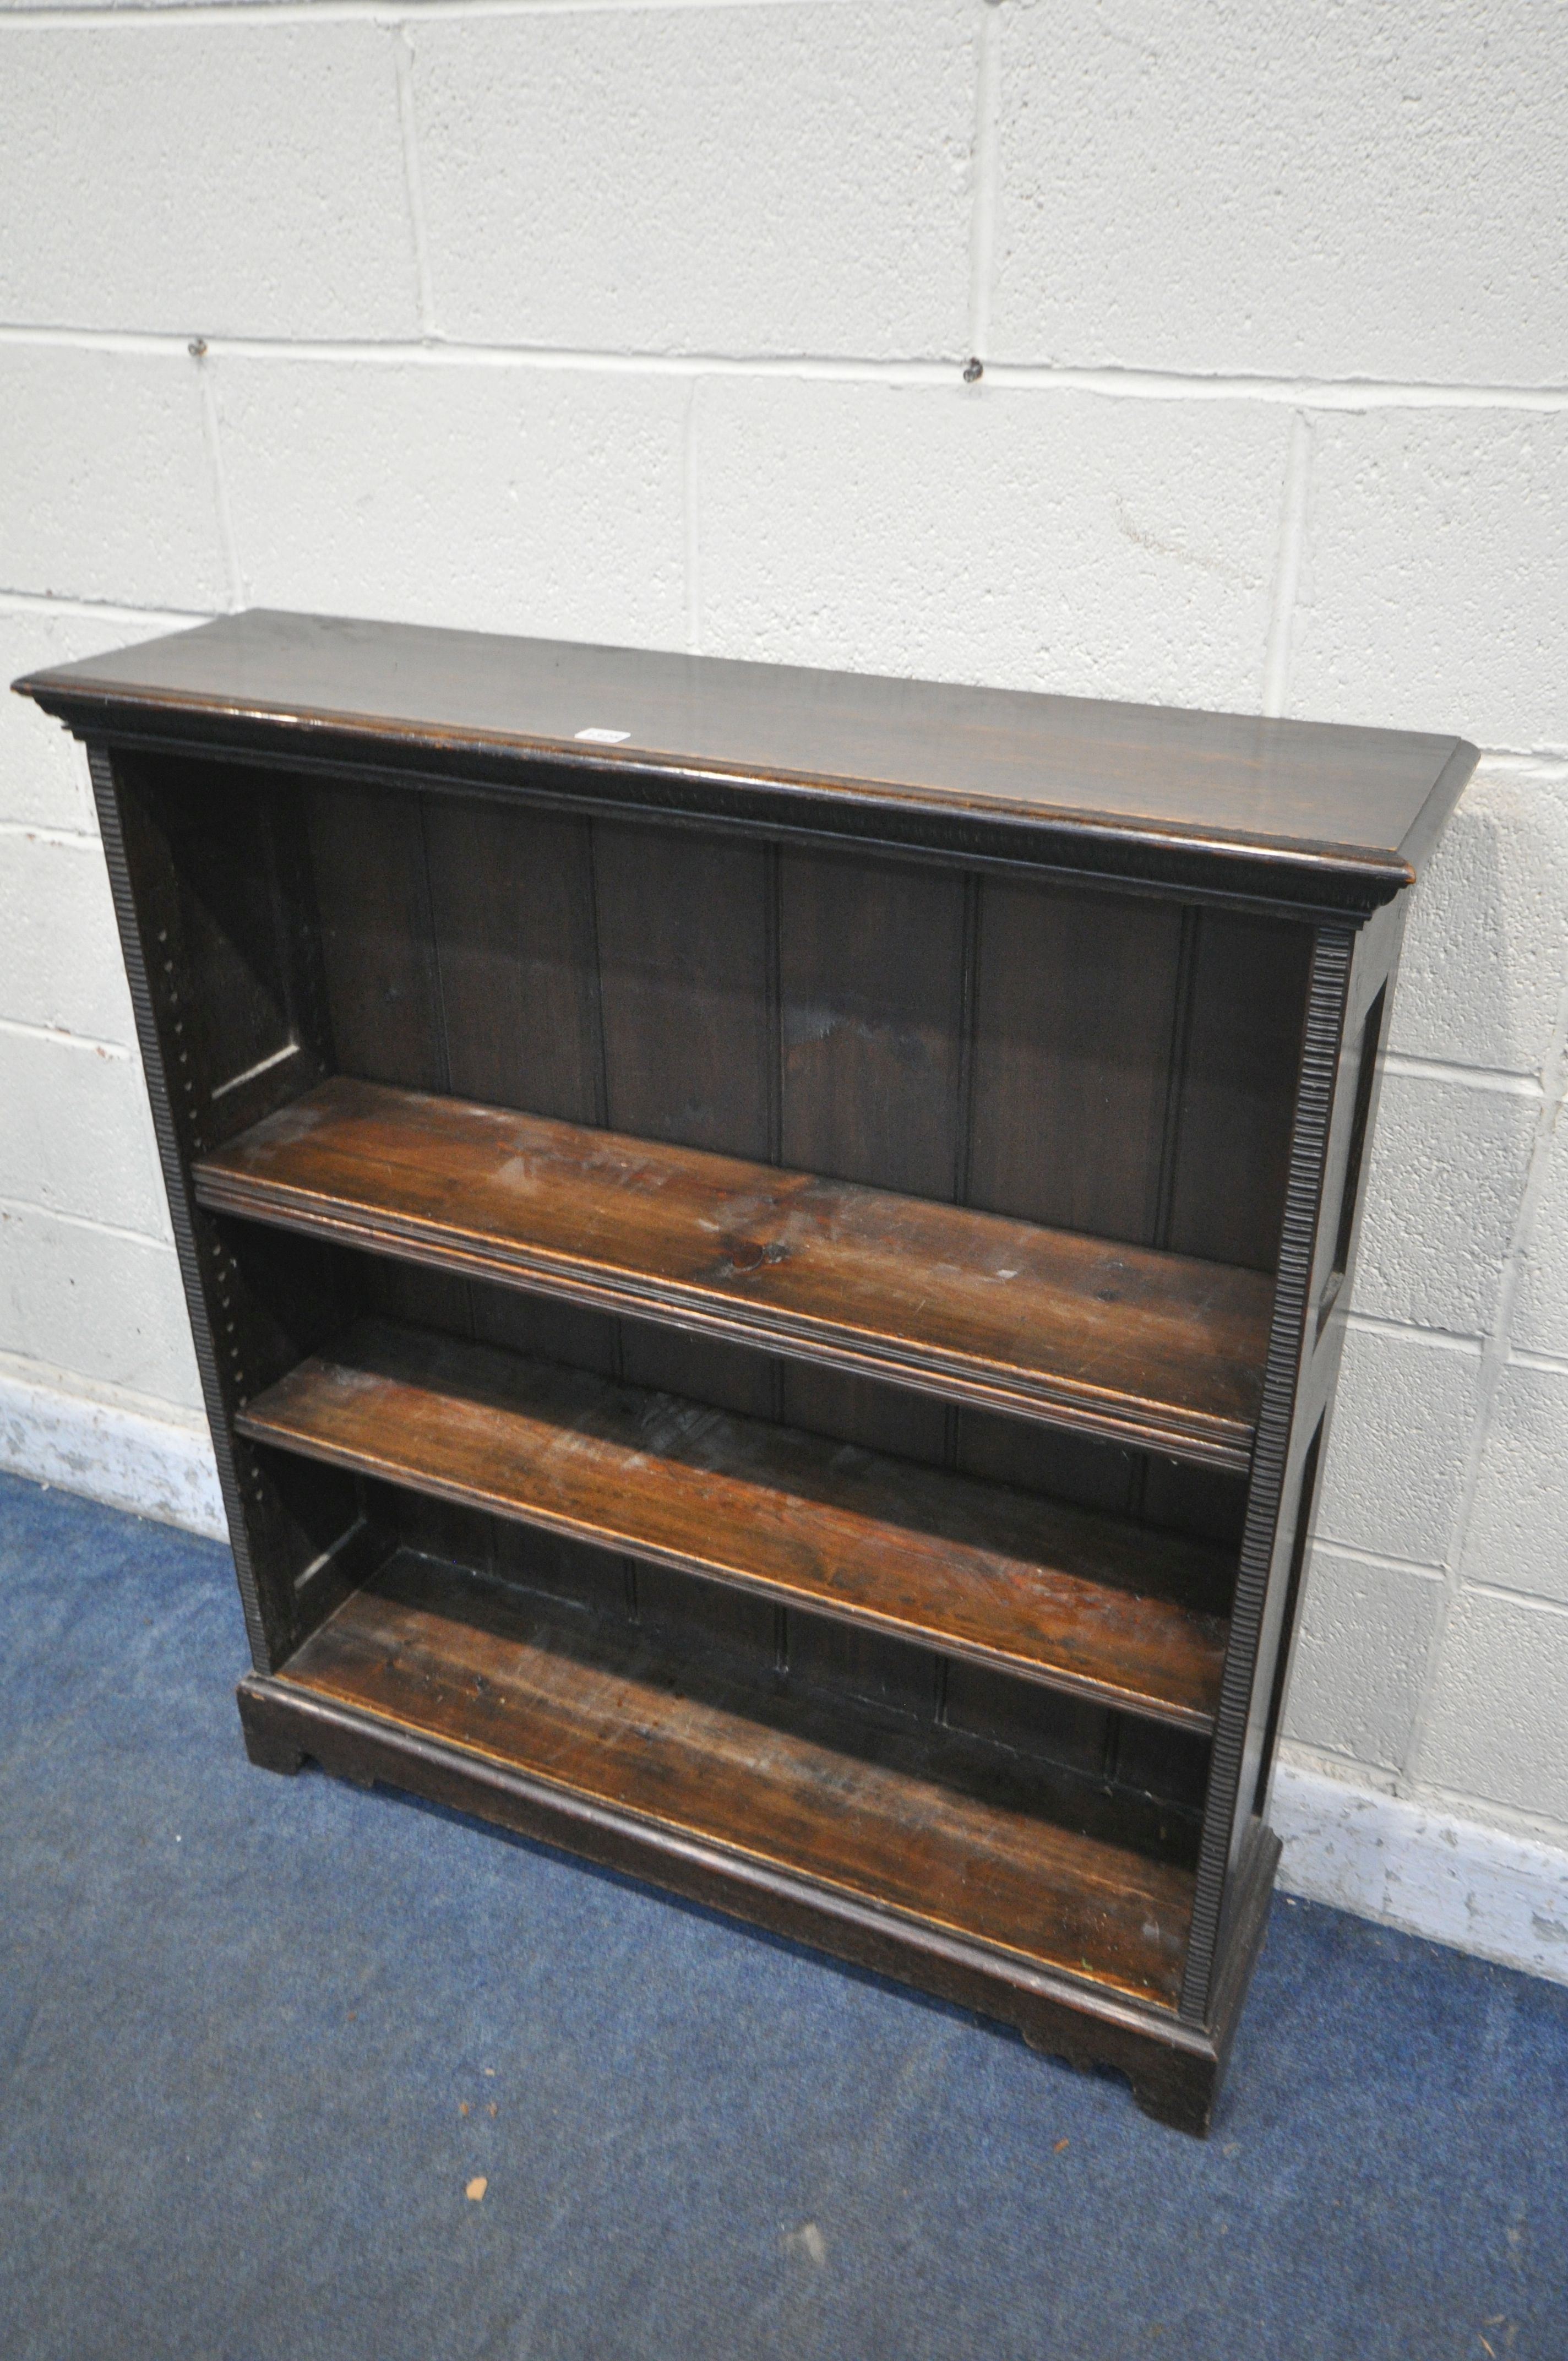 AN EARLY TO MID 20TH CENTURY OAK OPEN BOOKCASE, with three adjustable shelves, width 101cm x depth